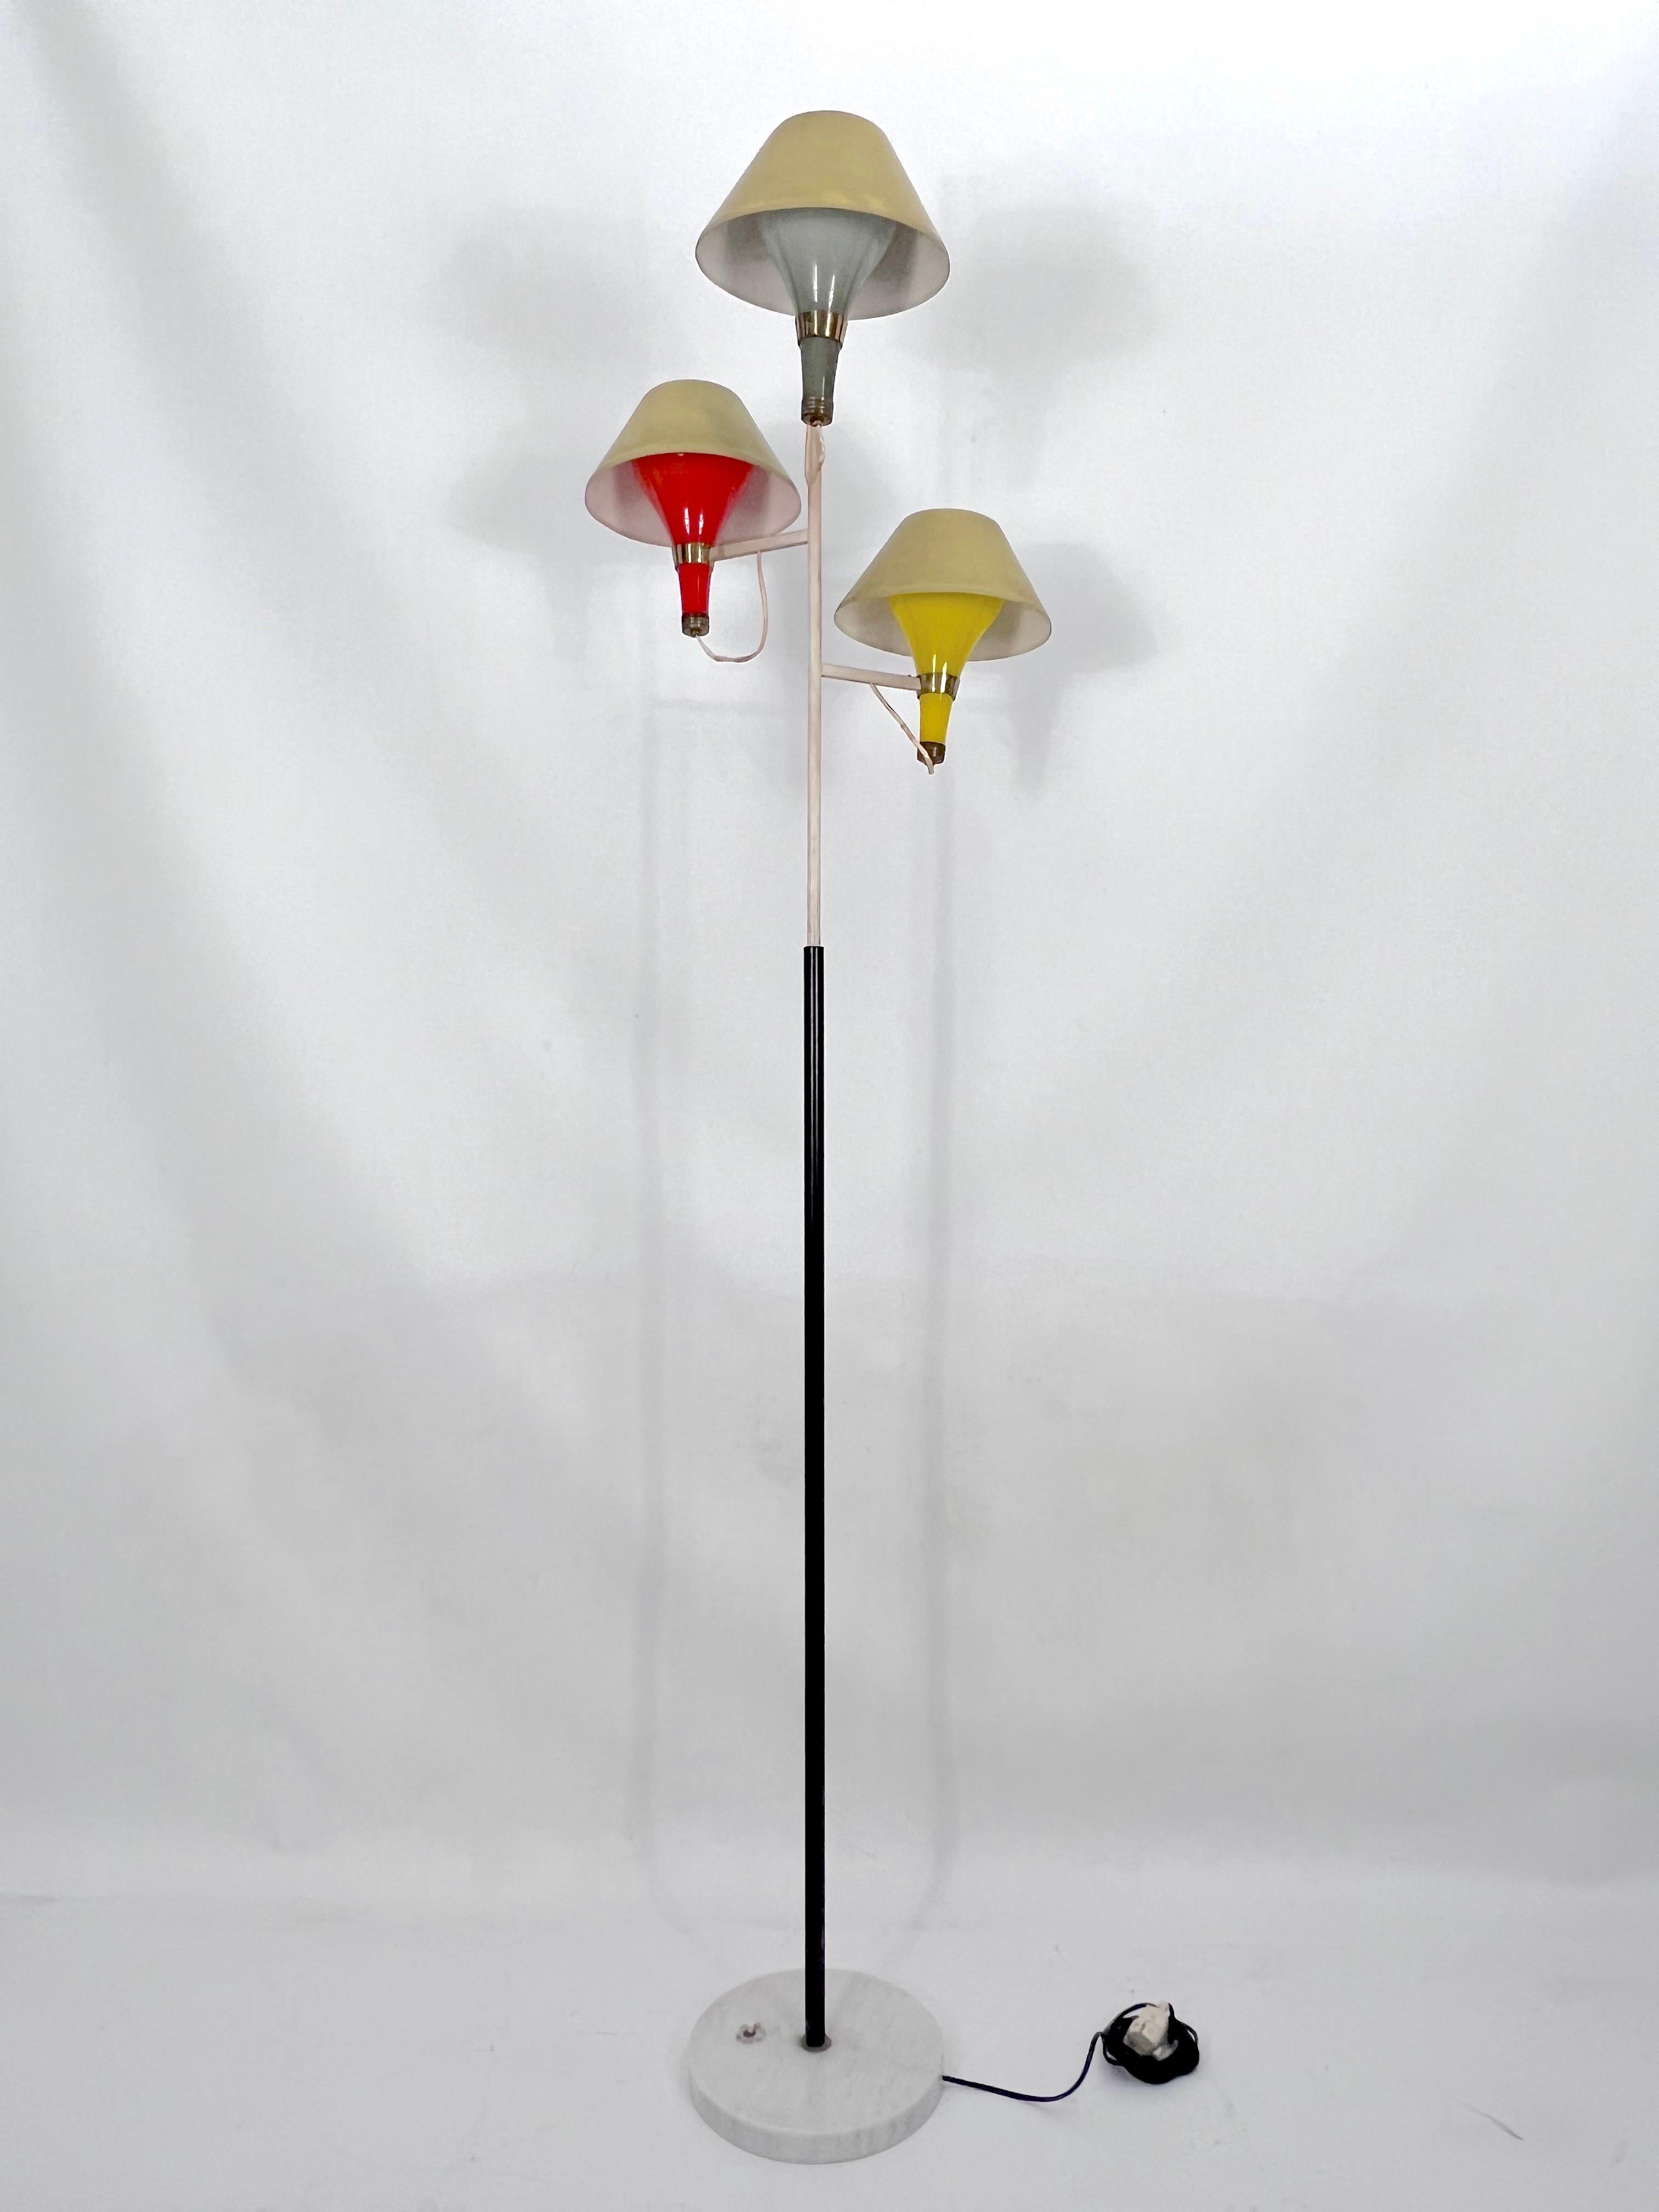 Italian Mid-Century Modern Three Arms Floor Lamp by Stilux Milano, Italy, 1950s For Sale